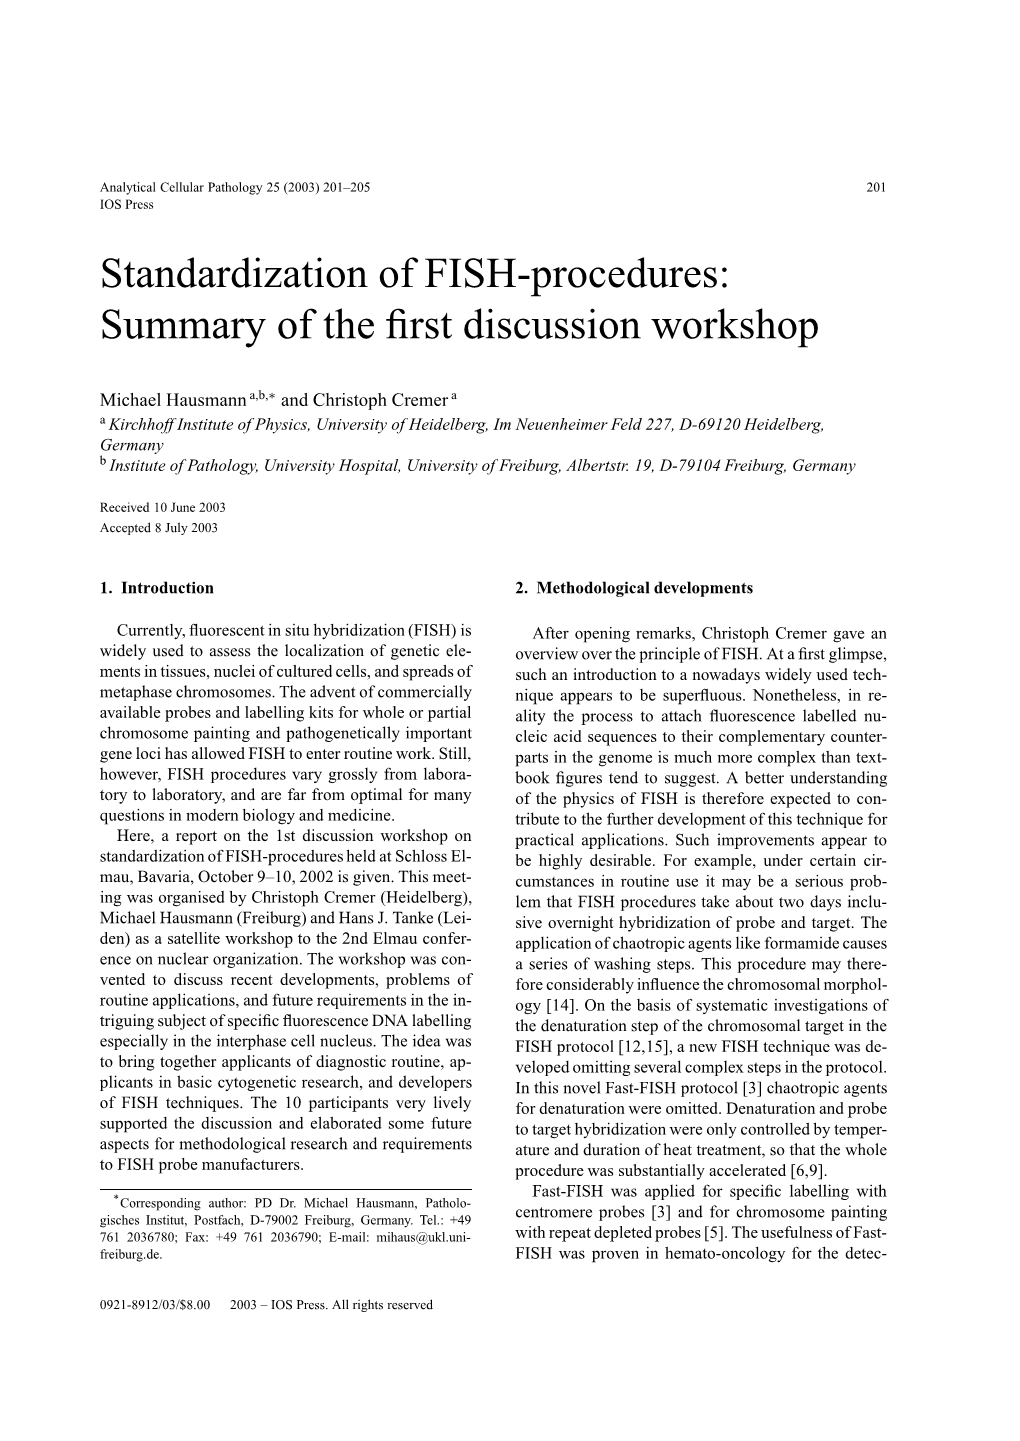 Standardization of FISH-Procedures: Summary of the ﬁrst Discussion Workshop